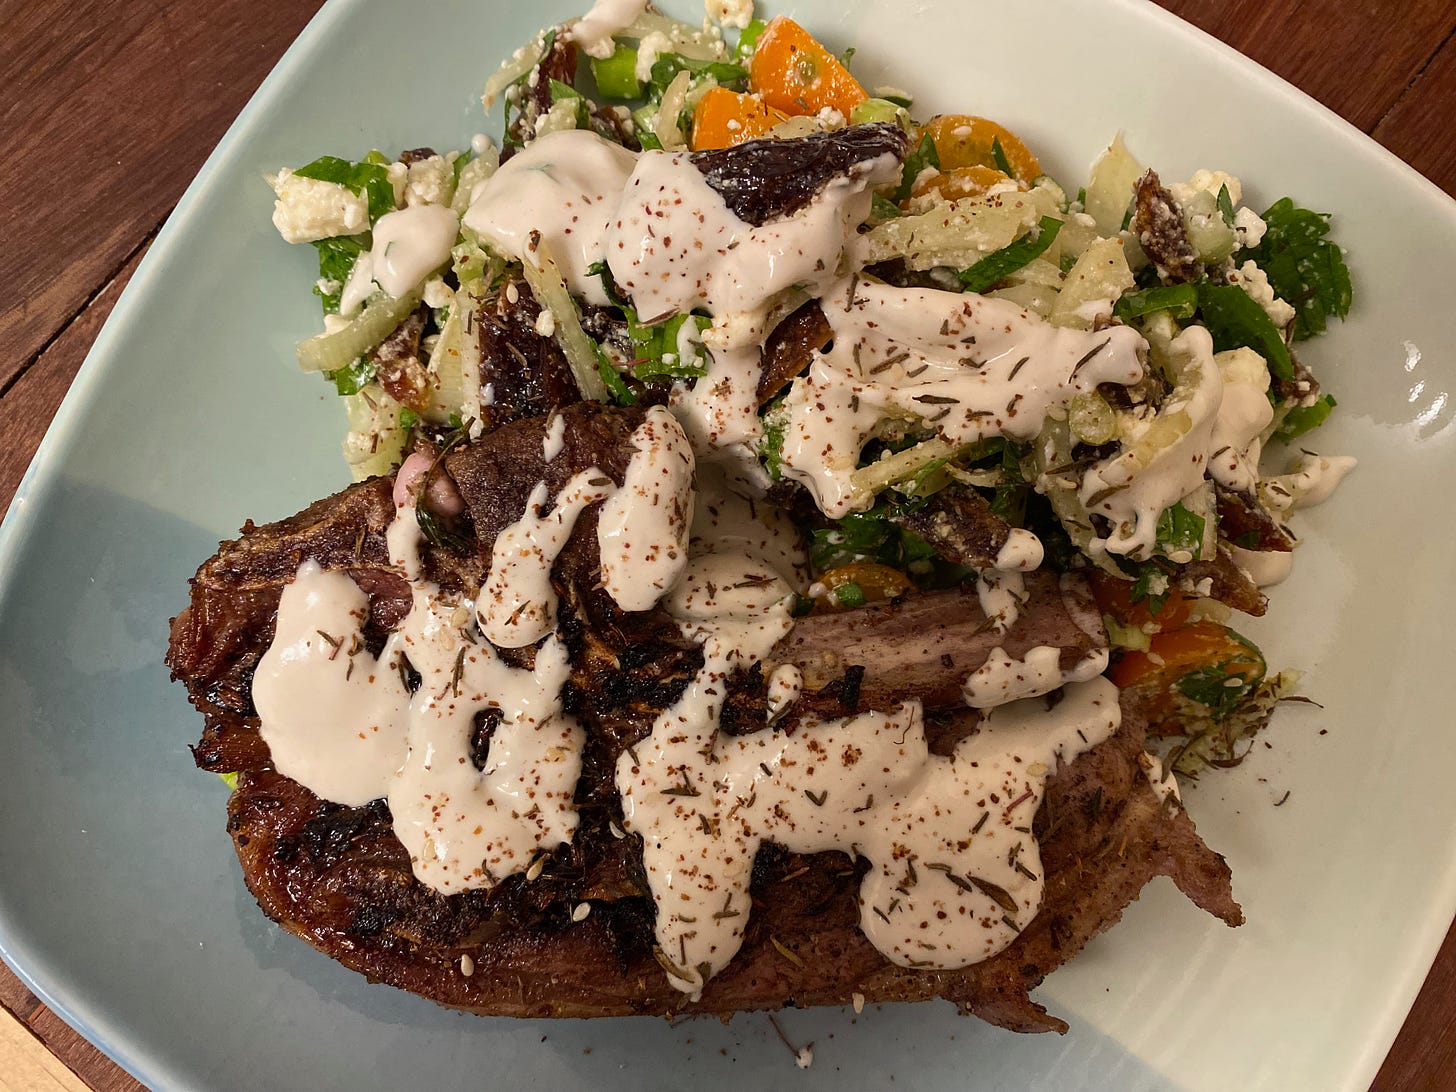 A square ceramic plate holding a browned lamb chop and a pile of fennel, date and cherry tomato salad. White tahini-lemon sauce is drizzled on top of the food, along with a sprinkling of ground sumac.